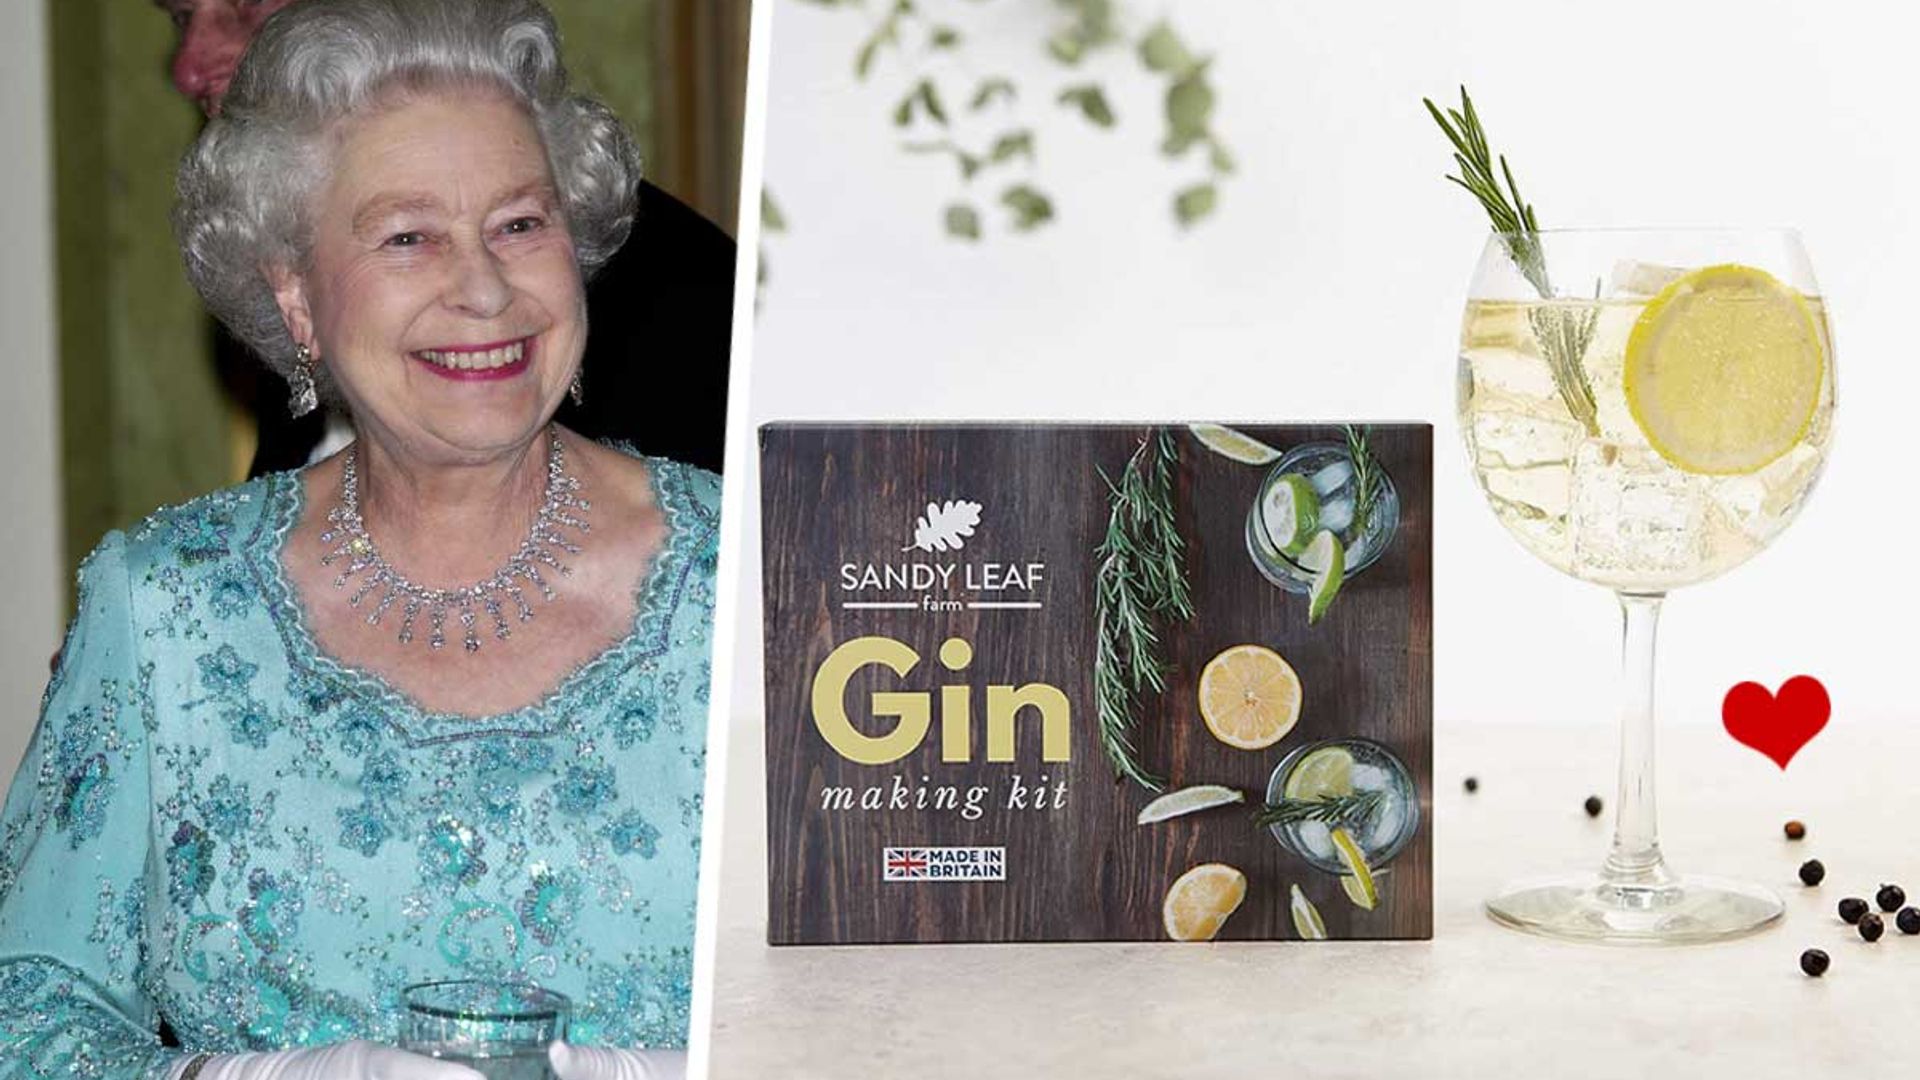 It's Gin O'clock! The Queen would love this gin making kit that's on sale right now